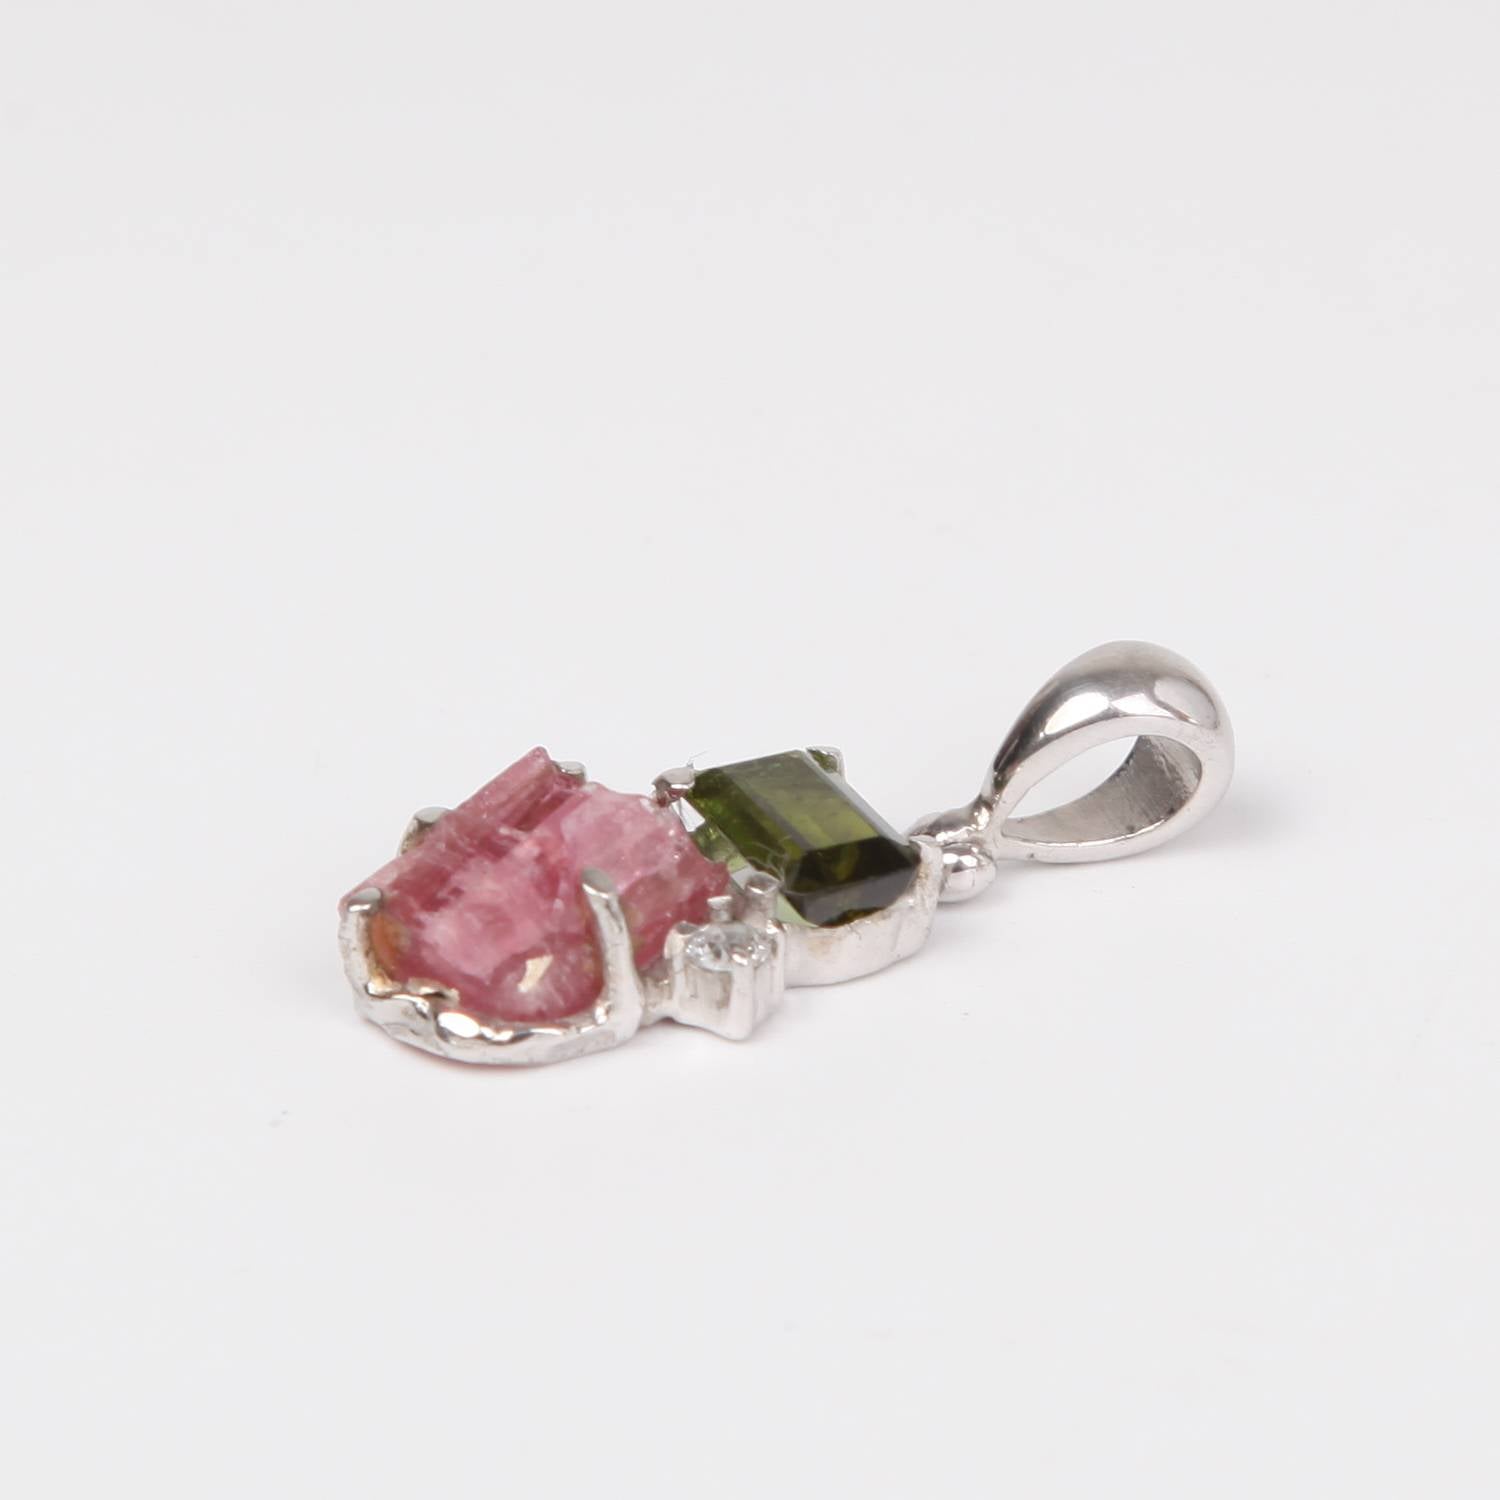 Sterling Silver Pendant with Rough Pink Tourmaline and Table Cut Green Tourmaline